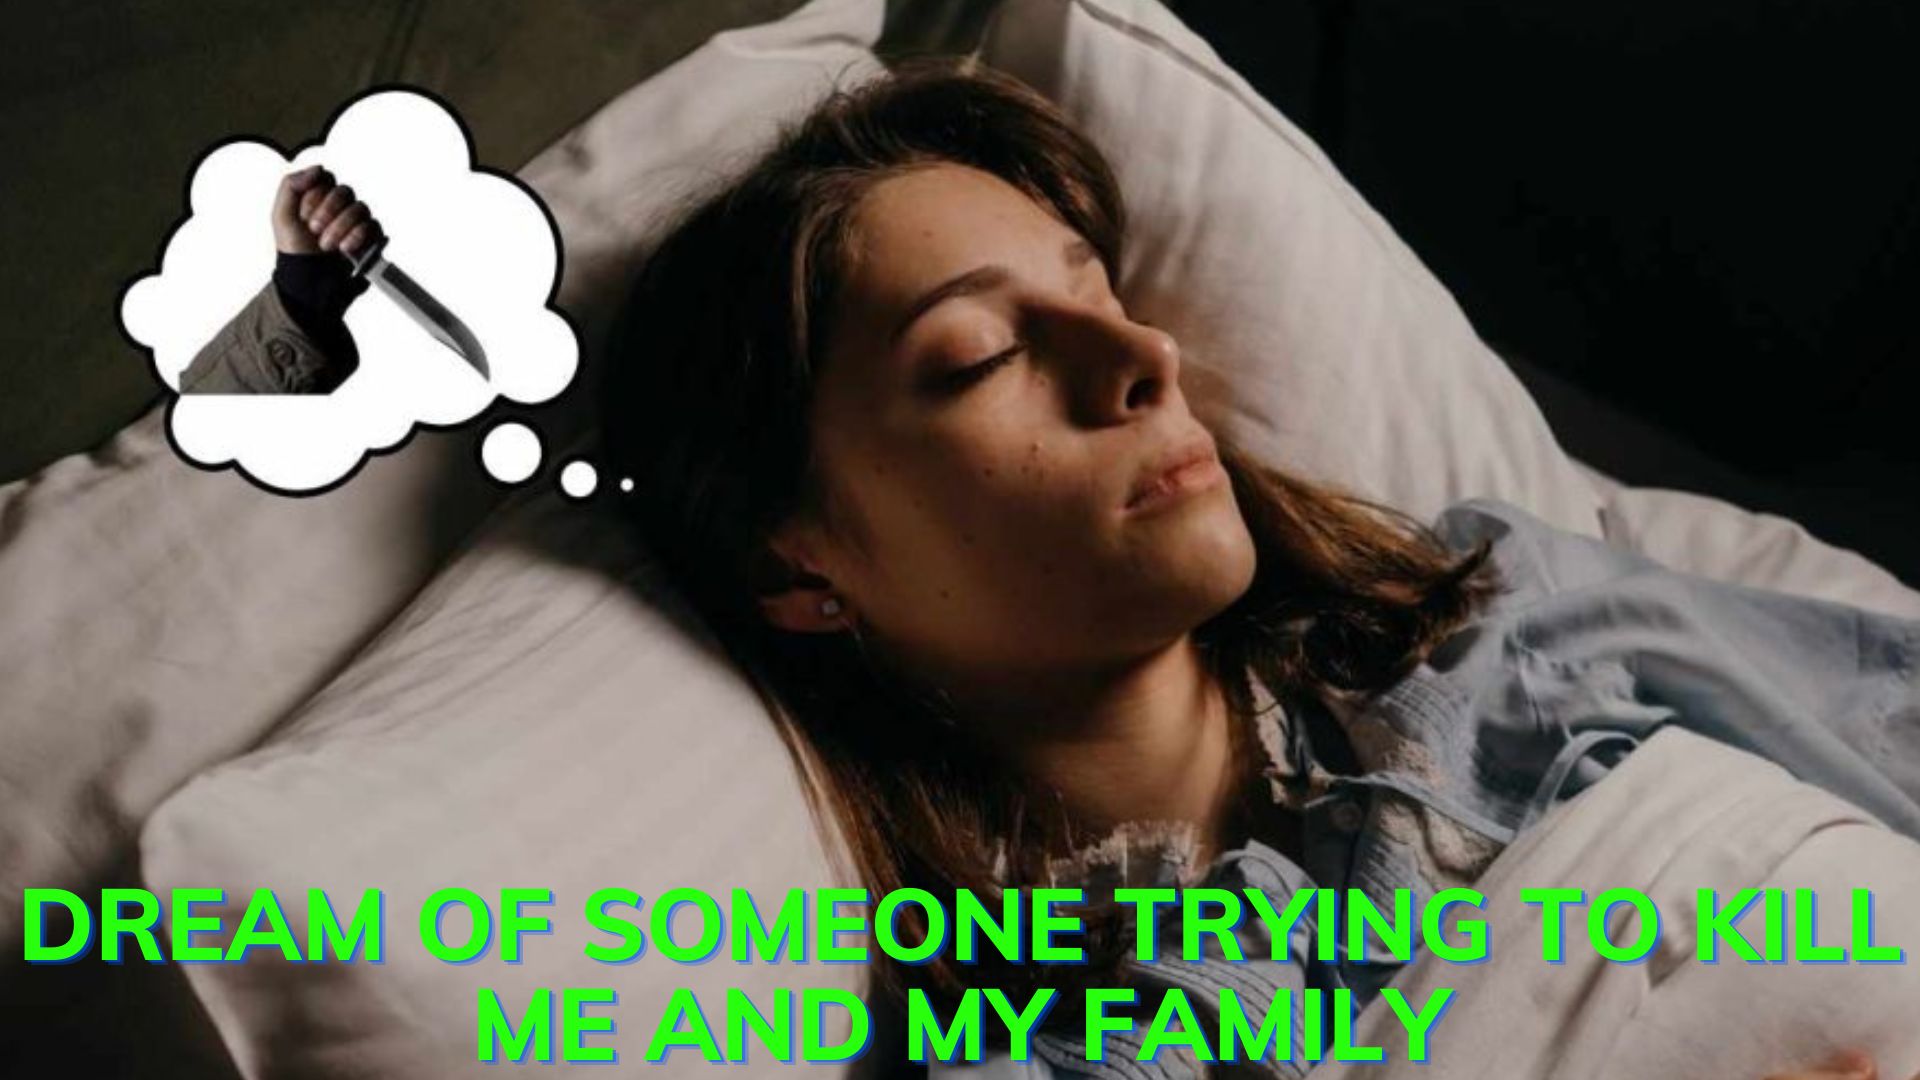 Dream Of Someone Trying To Kill Me And My Family - Why Am I Dreaming Of It?